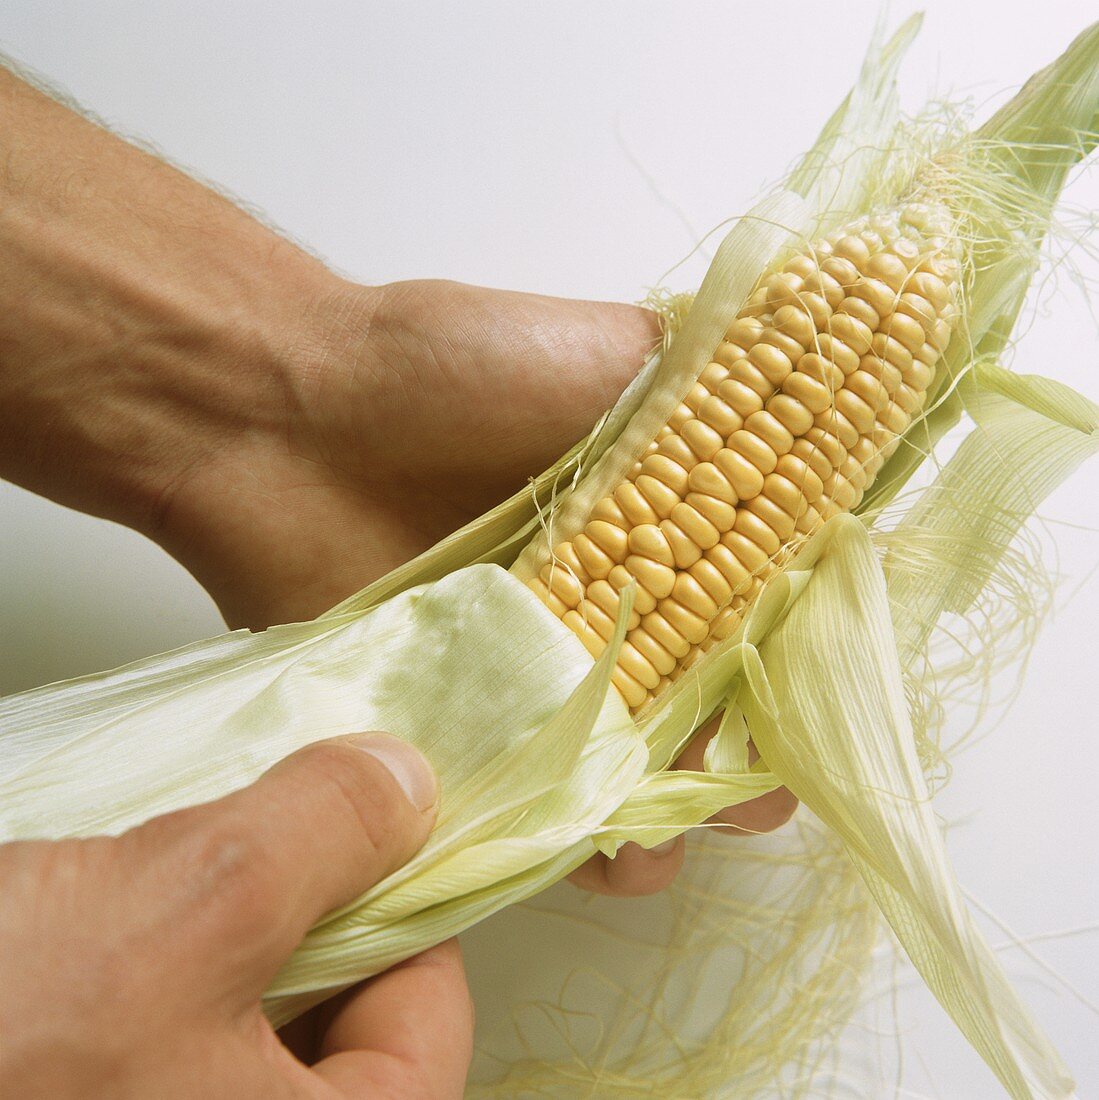 Removing the husk from a corncob